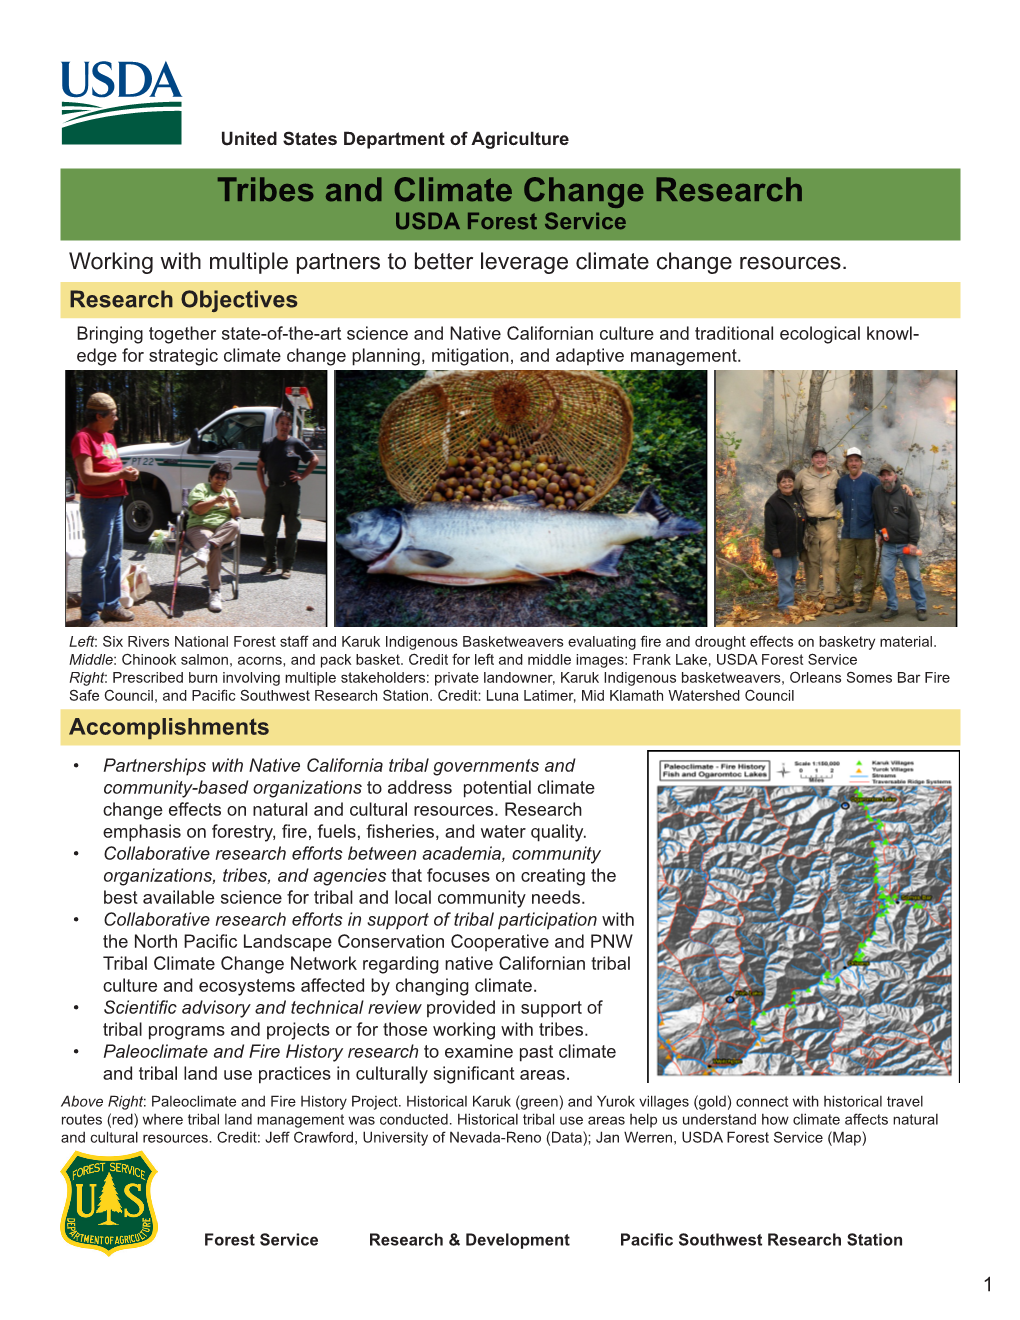 Californian Culture and Traditional Ecological Knowl- Edge for Strategic Climate Change Planning, Mitigation, and Adaptive Management